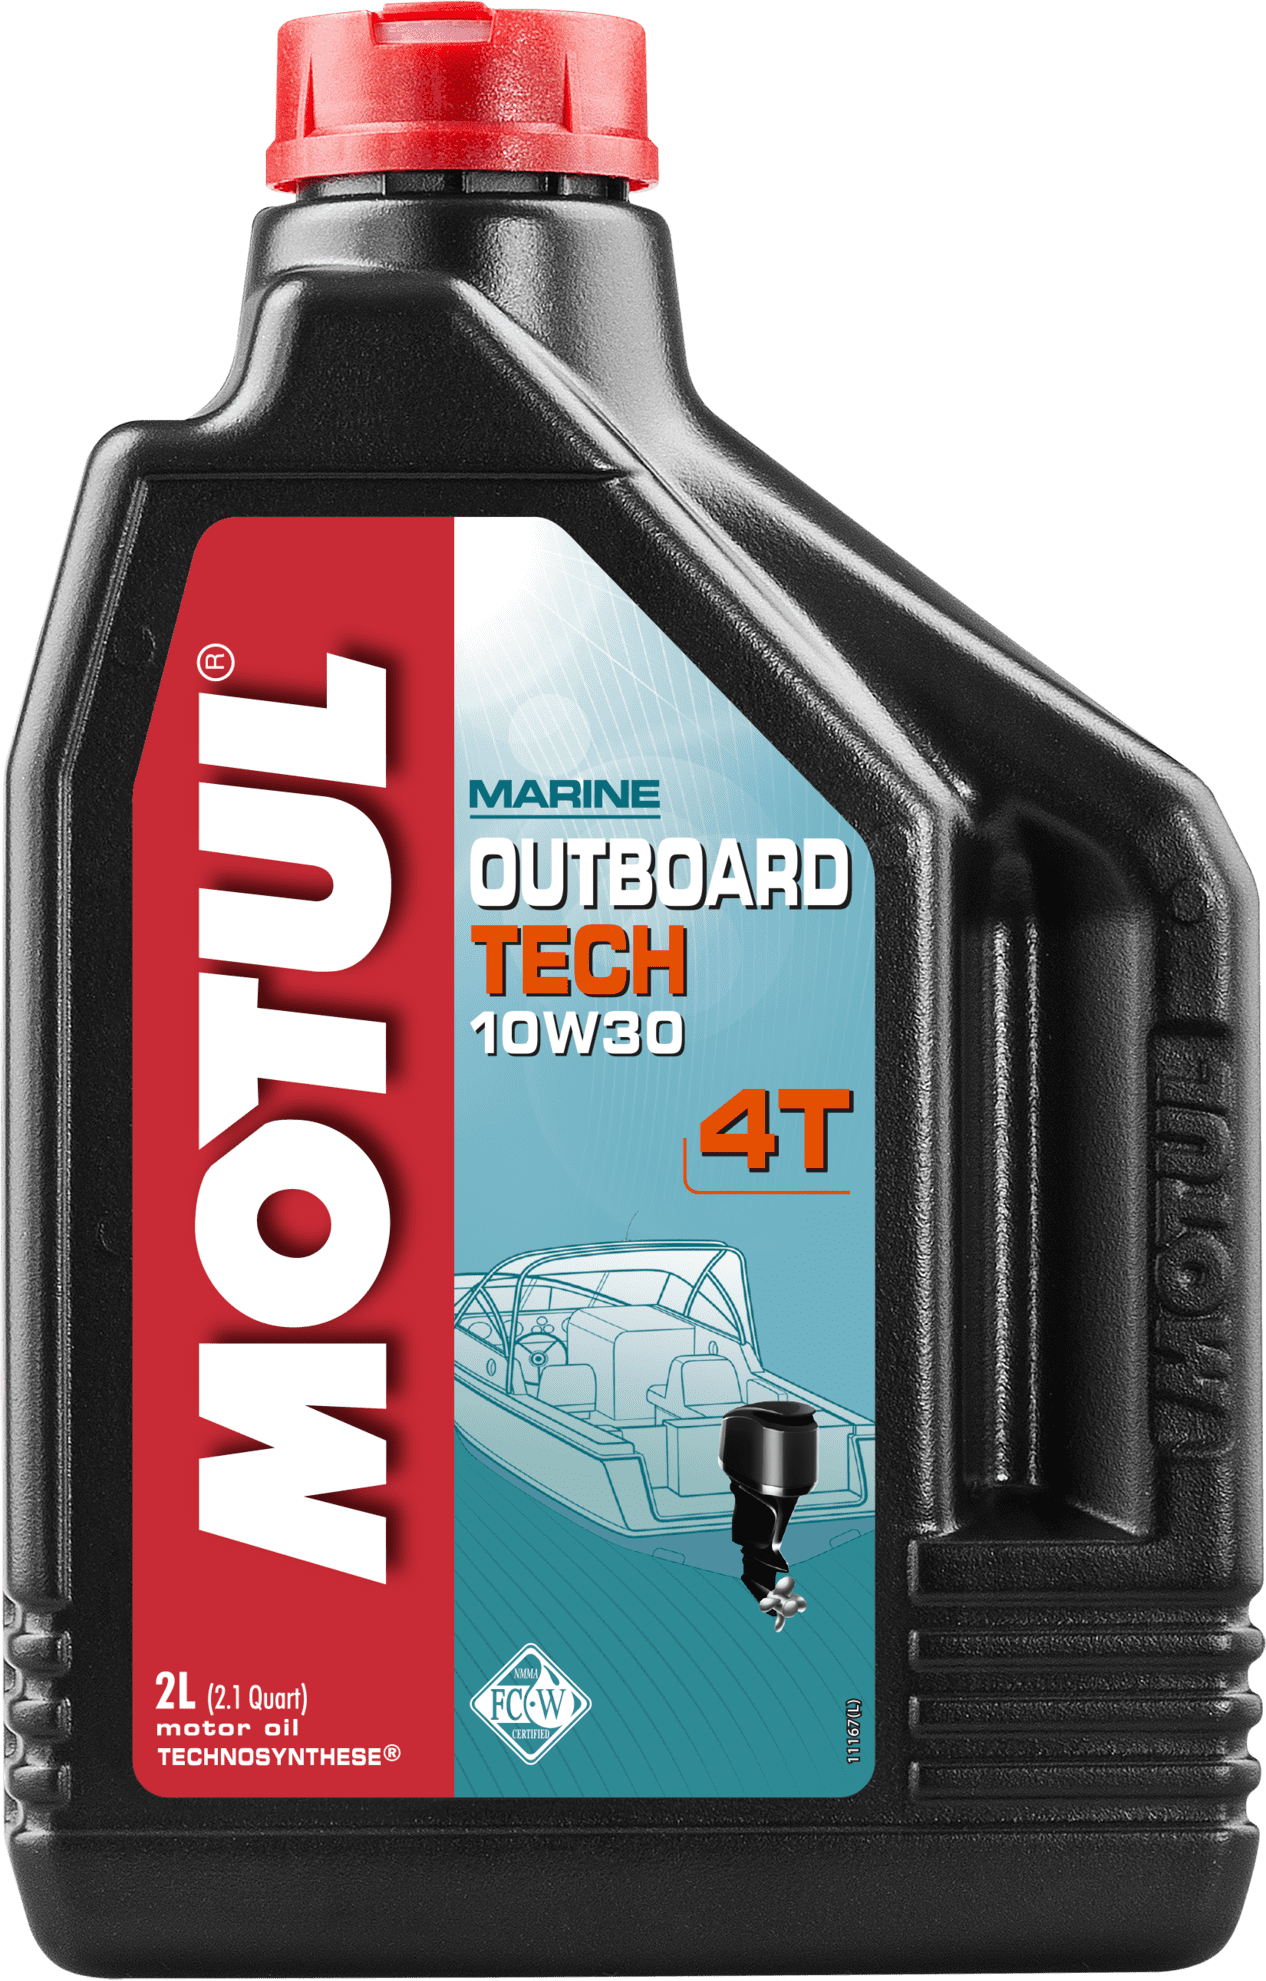 106446-2 Technosynthese® lubricant for 4-Stroke Outboard or sterndrive engines calling for NMMA FC-W lubricants.